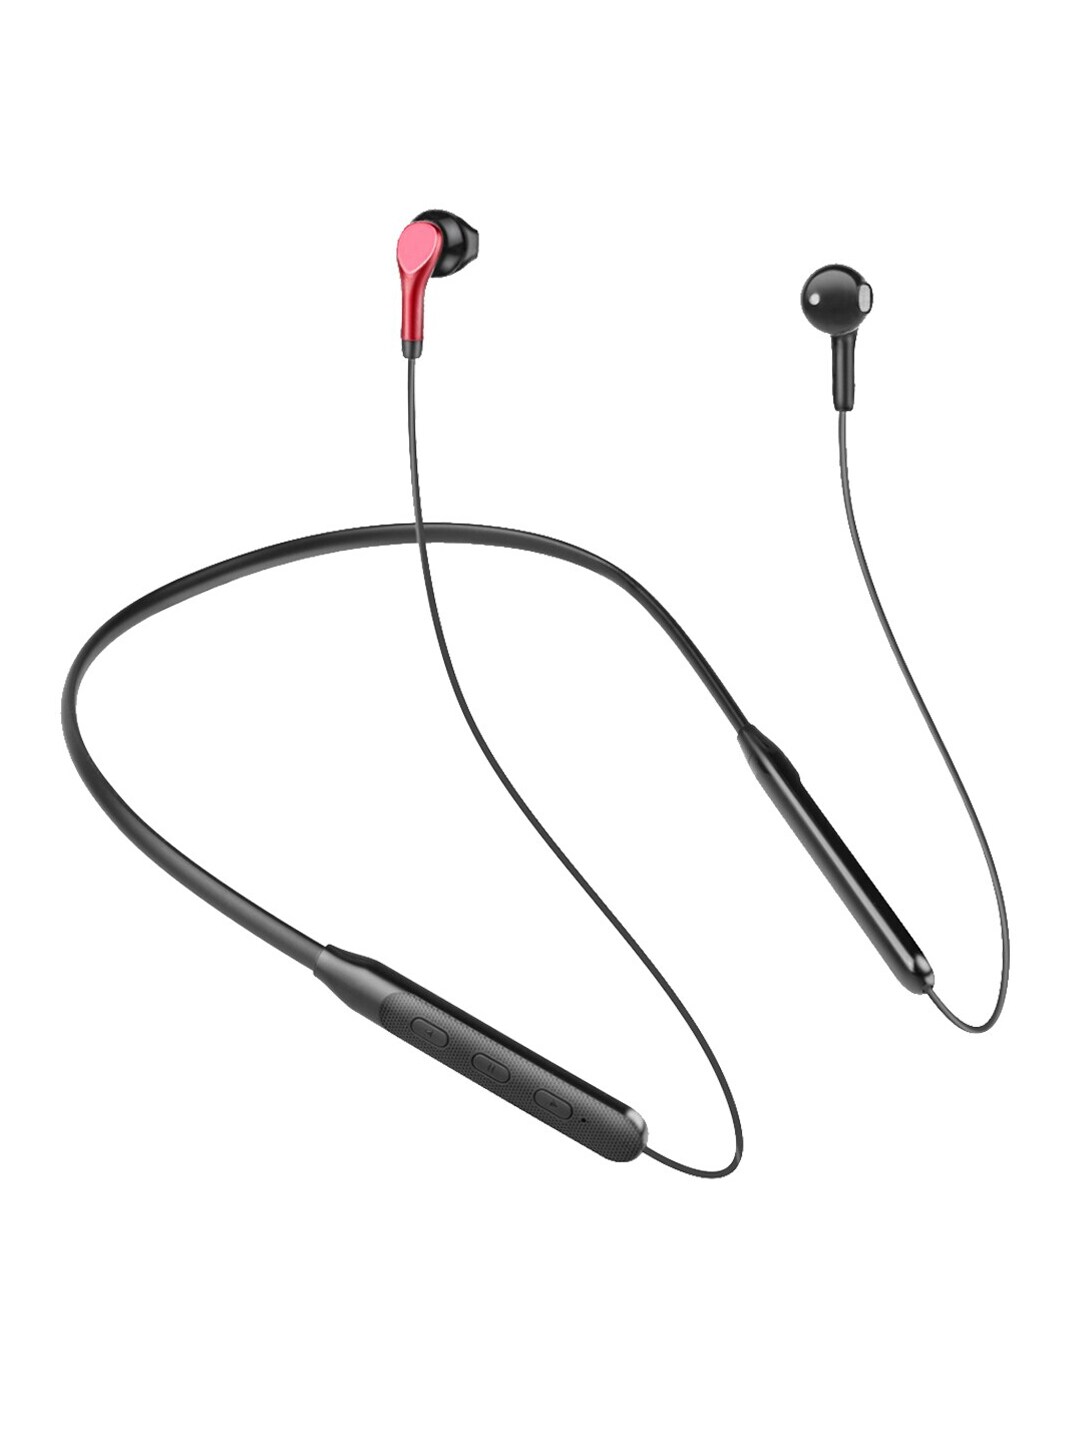 GIZMORE Red Solid Dual Tone MN220 Bluetooth 5.0 in-Ear Wireless Neckband Earphone Price in India